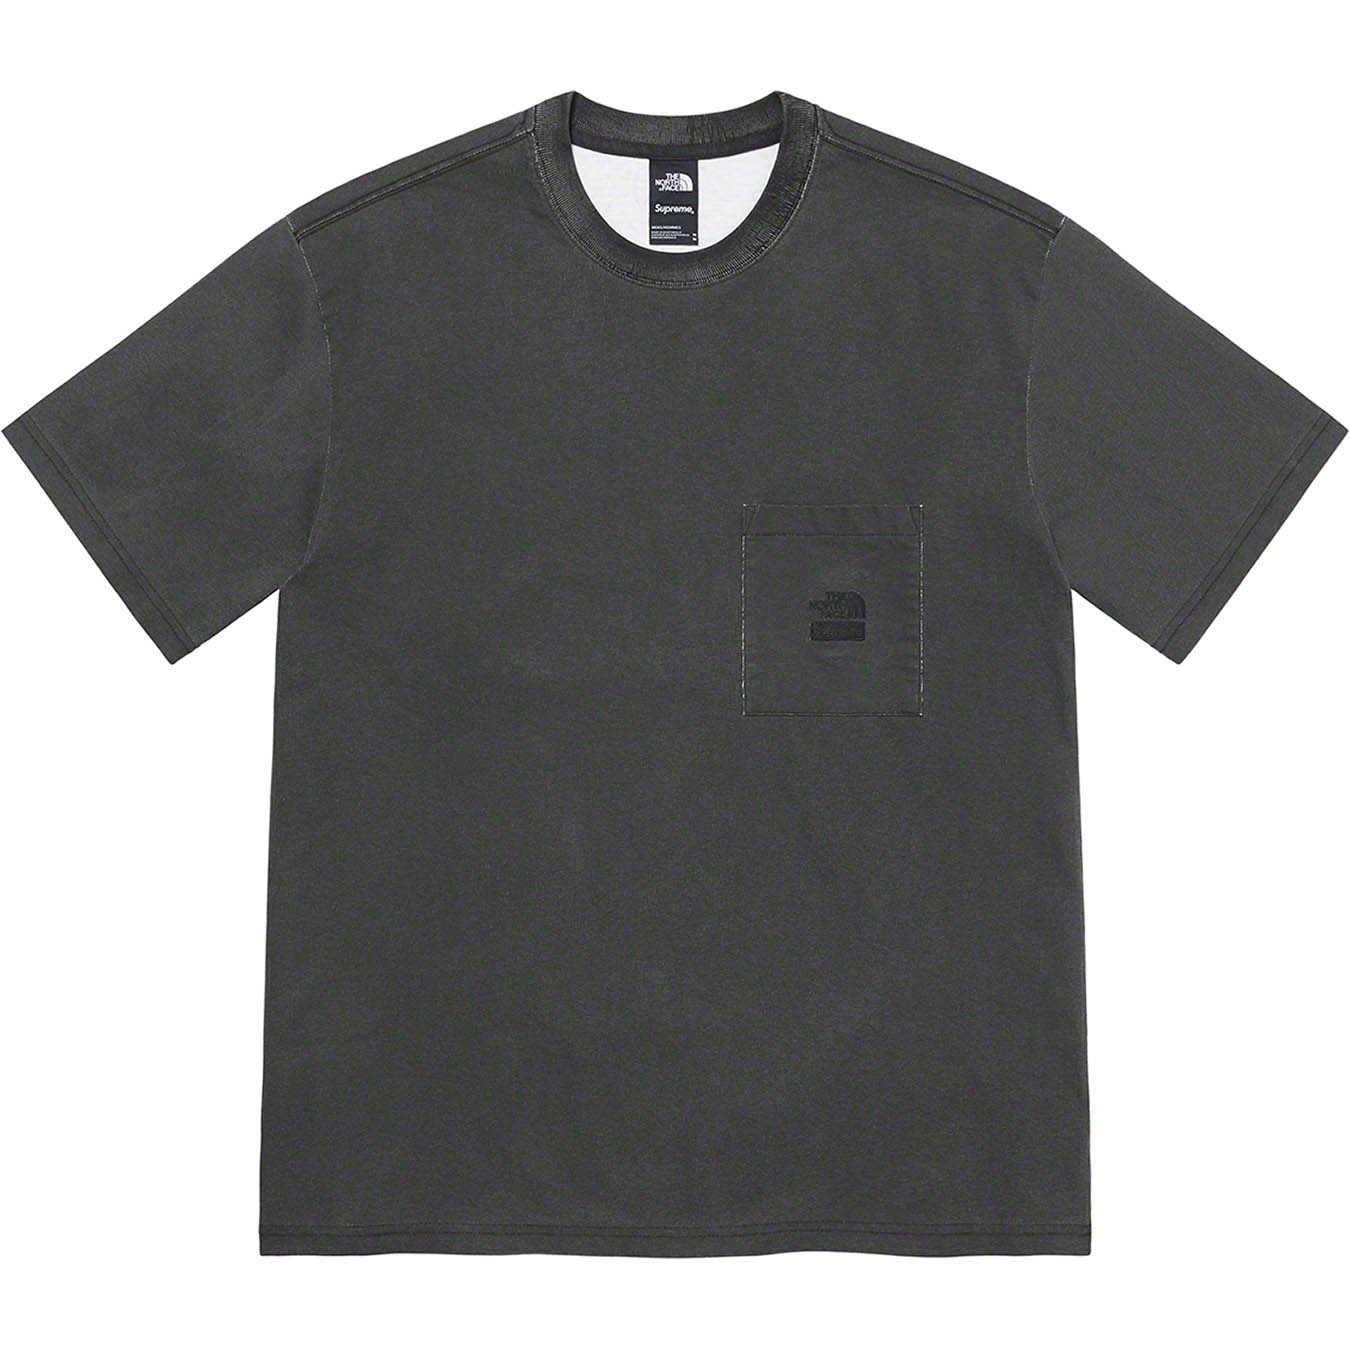 Supreme®/The North Face® Pigment Printed Pocket Tee